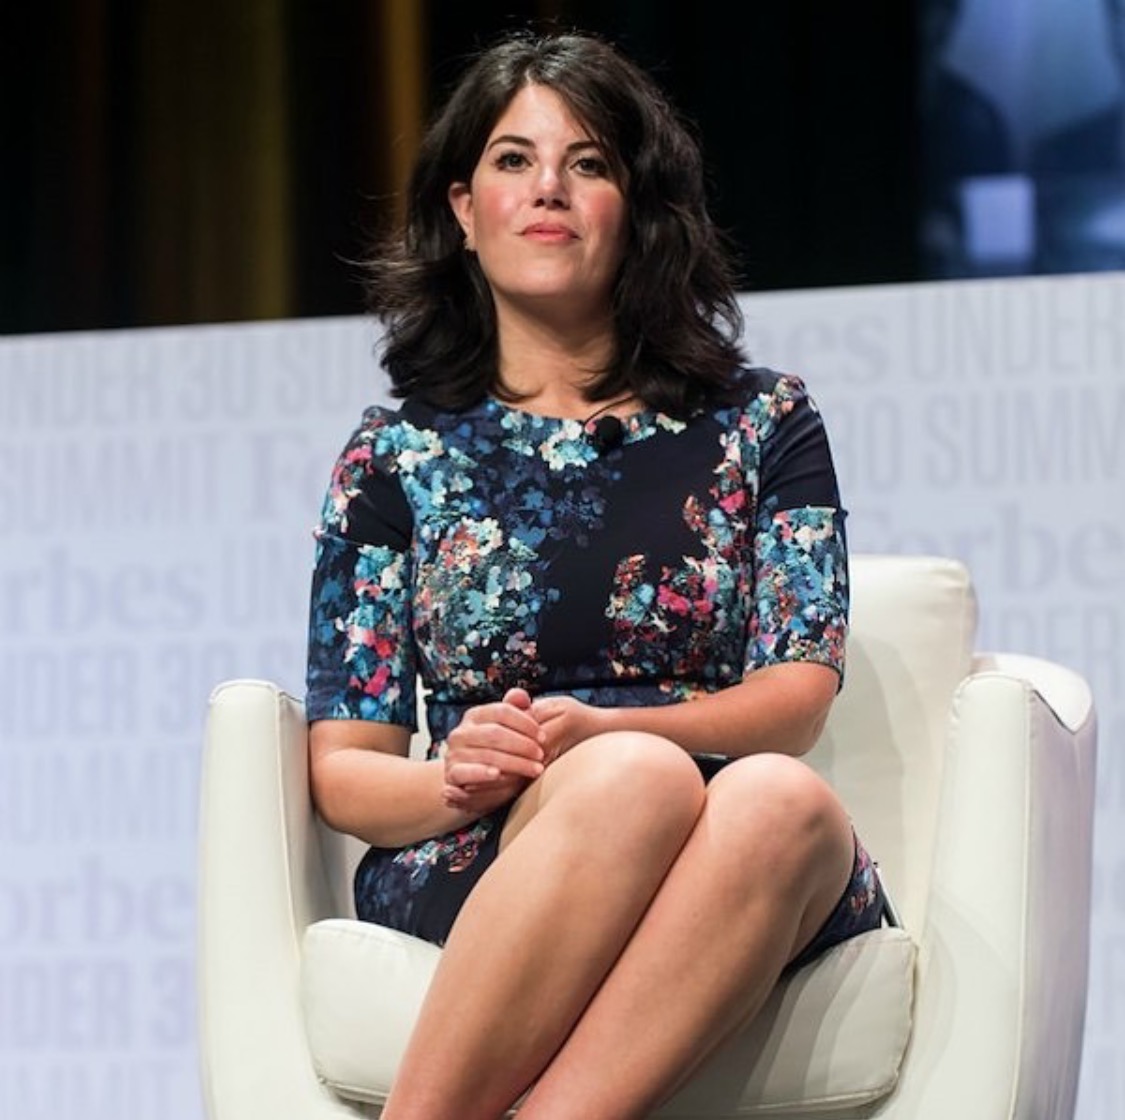 Monica Lewinsky abruptly huffs off stage over Clinton question - Monica Lew...